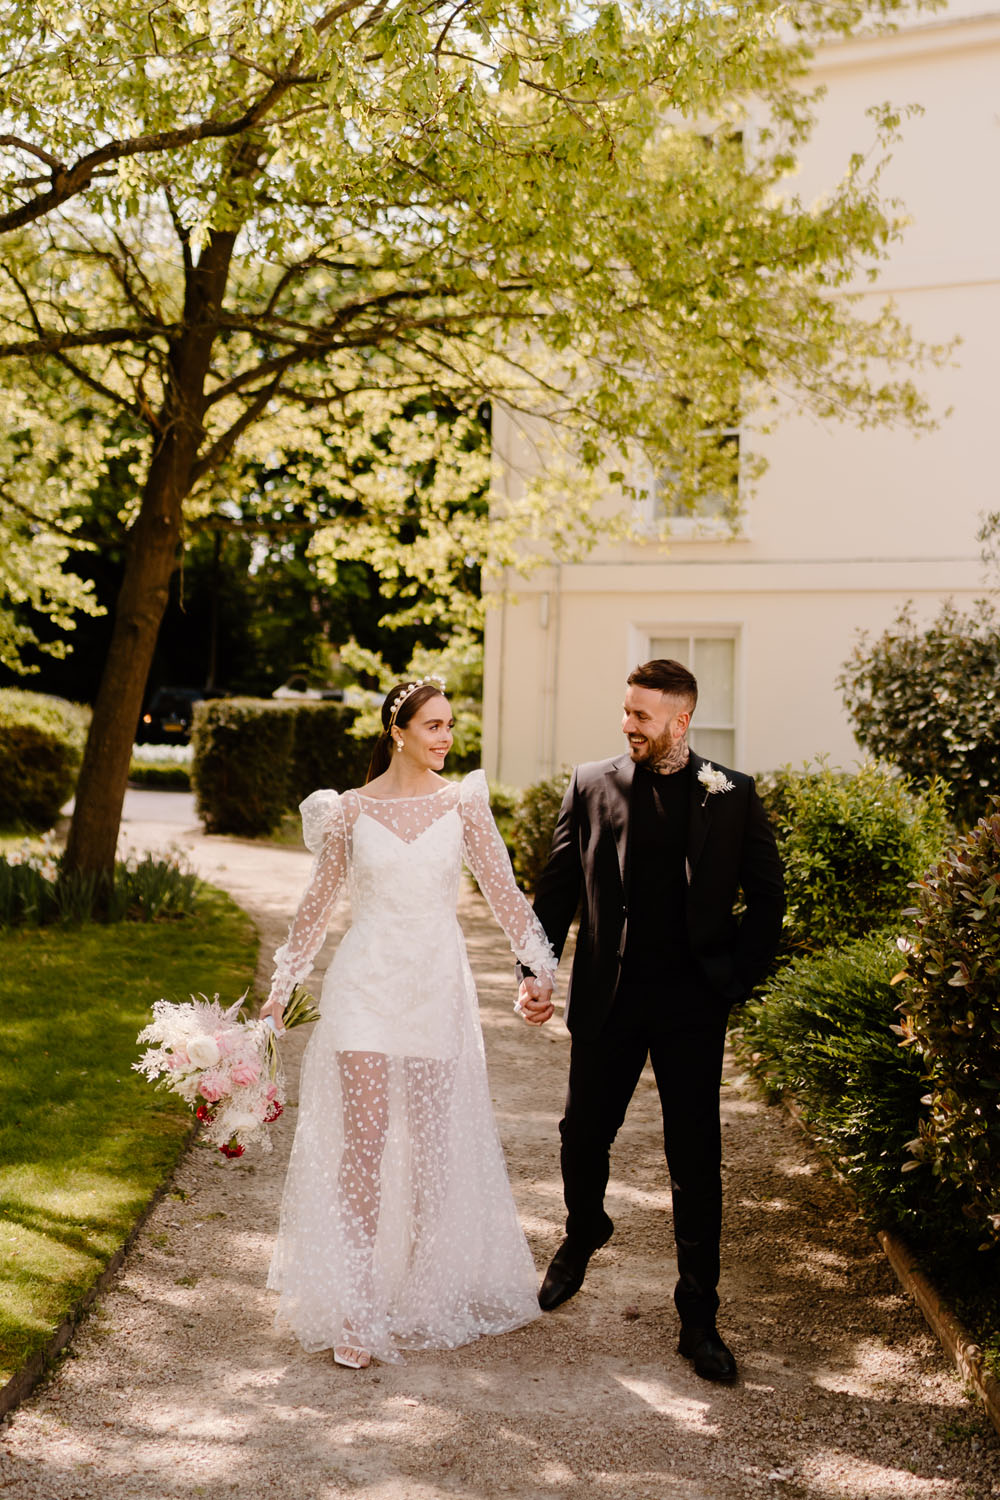 portrait of groom and bride with polka dot wedding dress